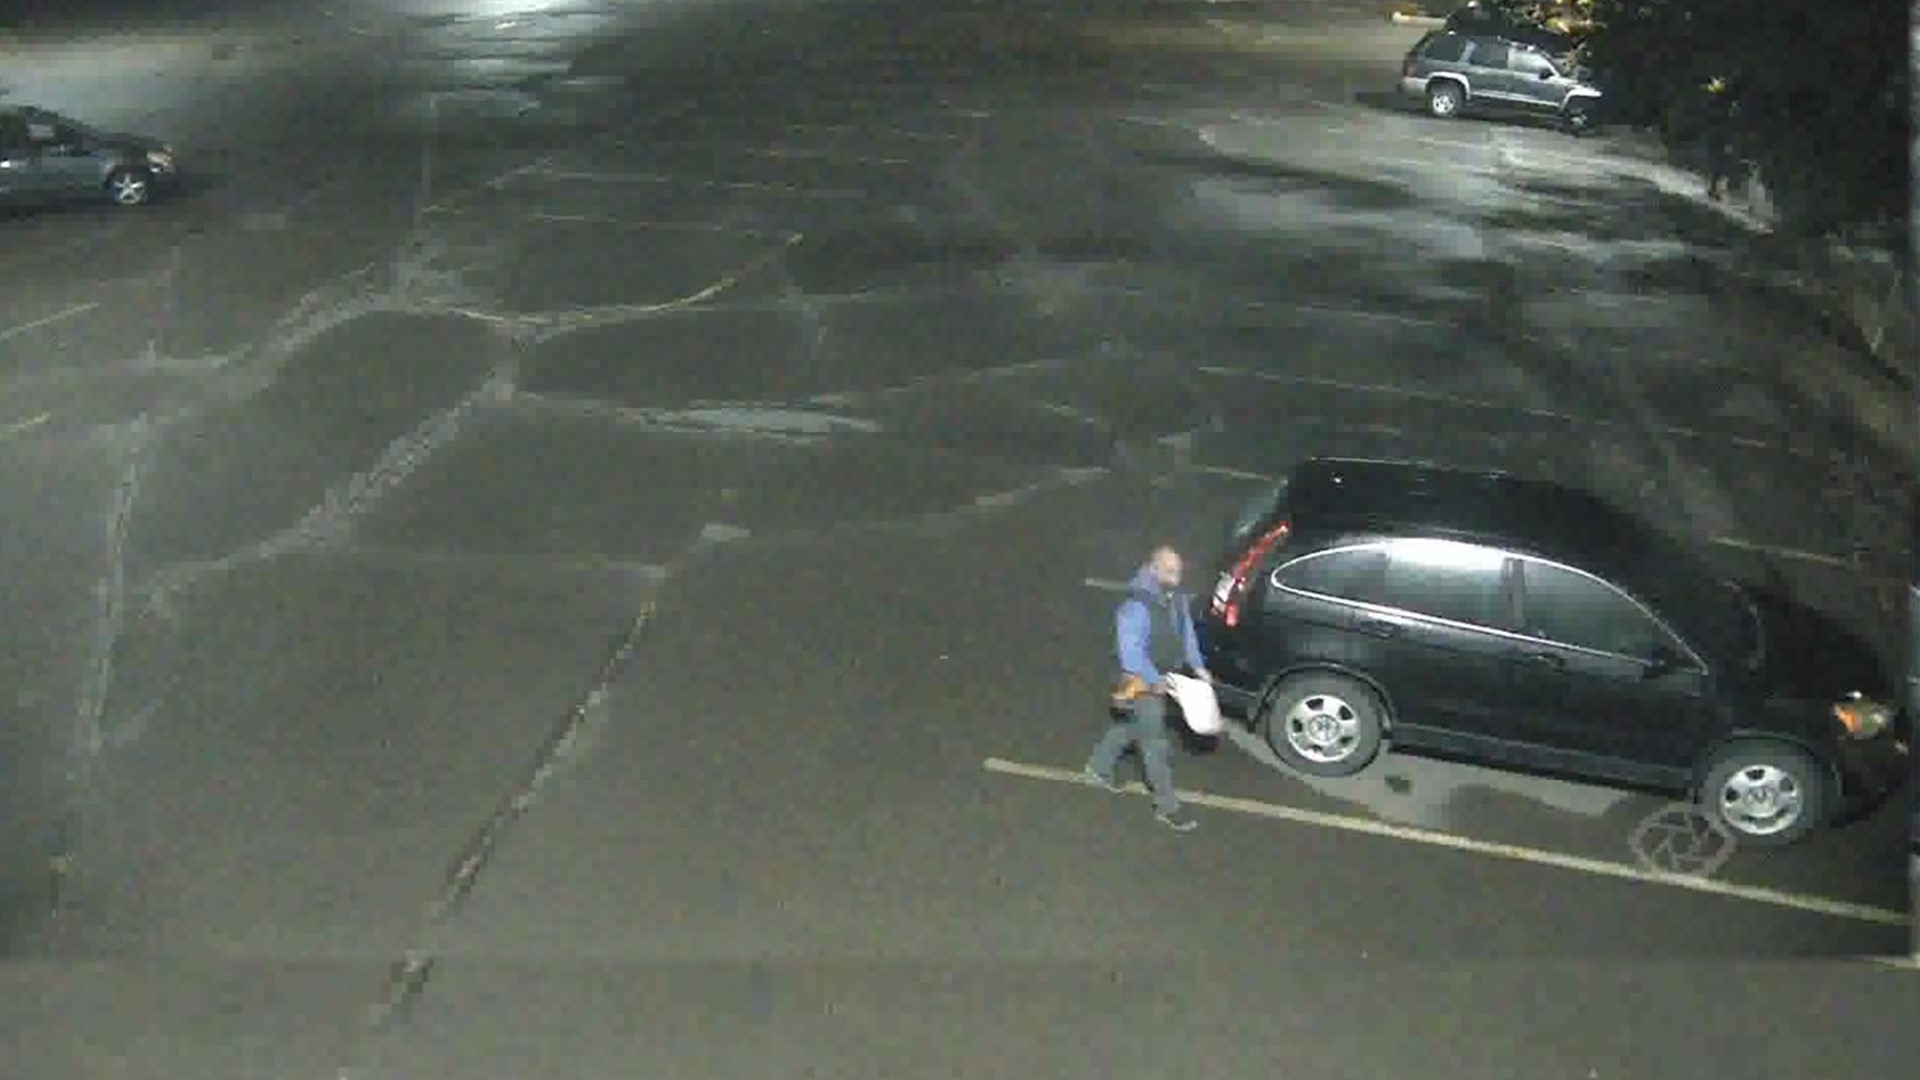 Surveillance video shows someone trying to take a catalytic converter from a vehicle parked at the Wayne Memorial Hospital lot.